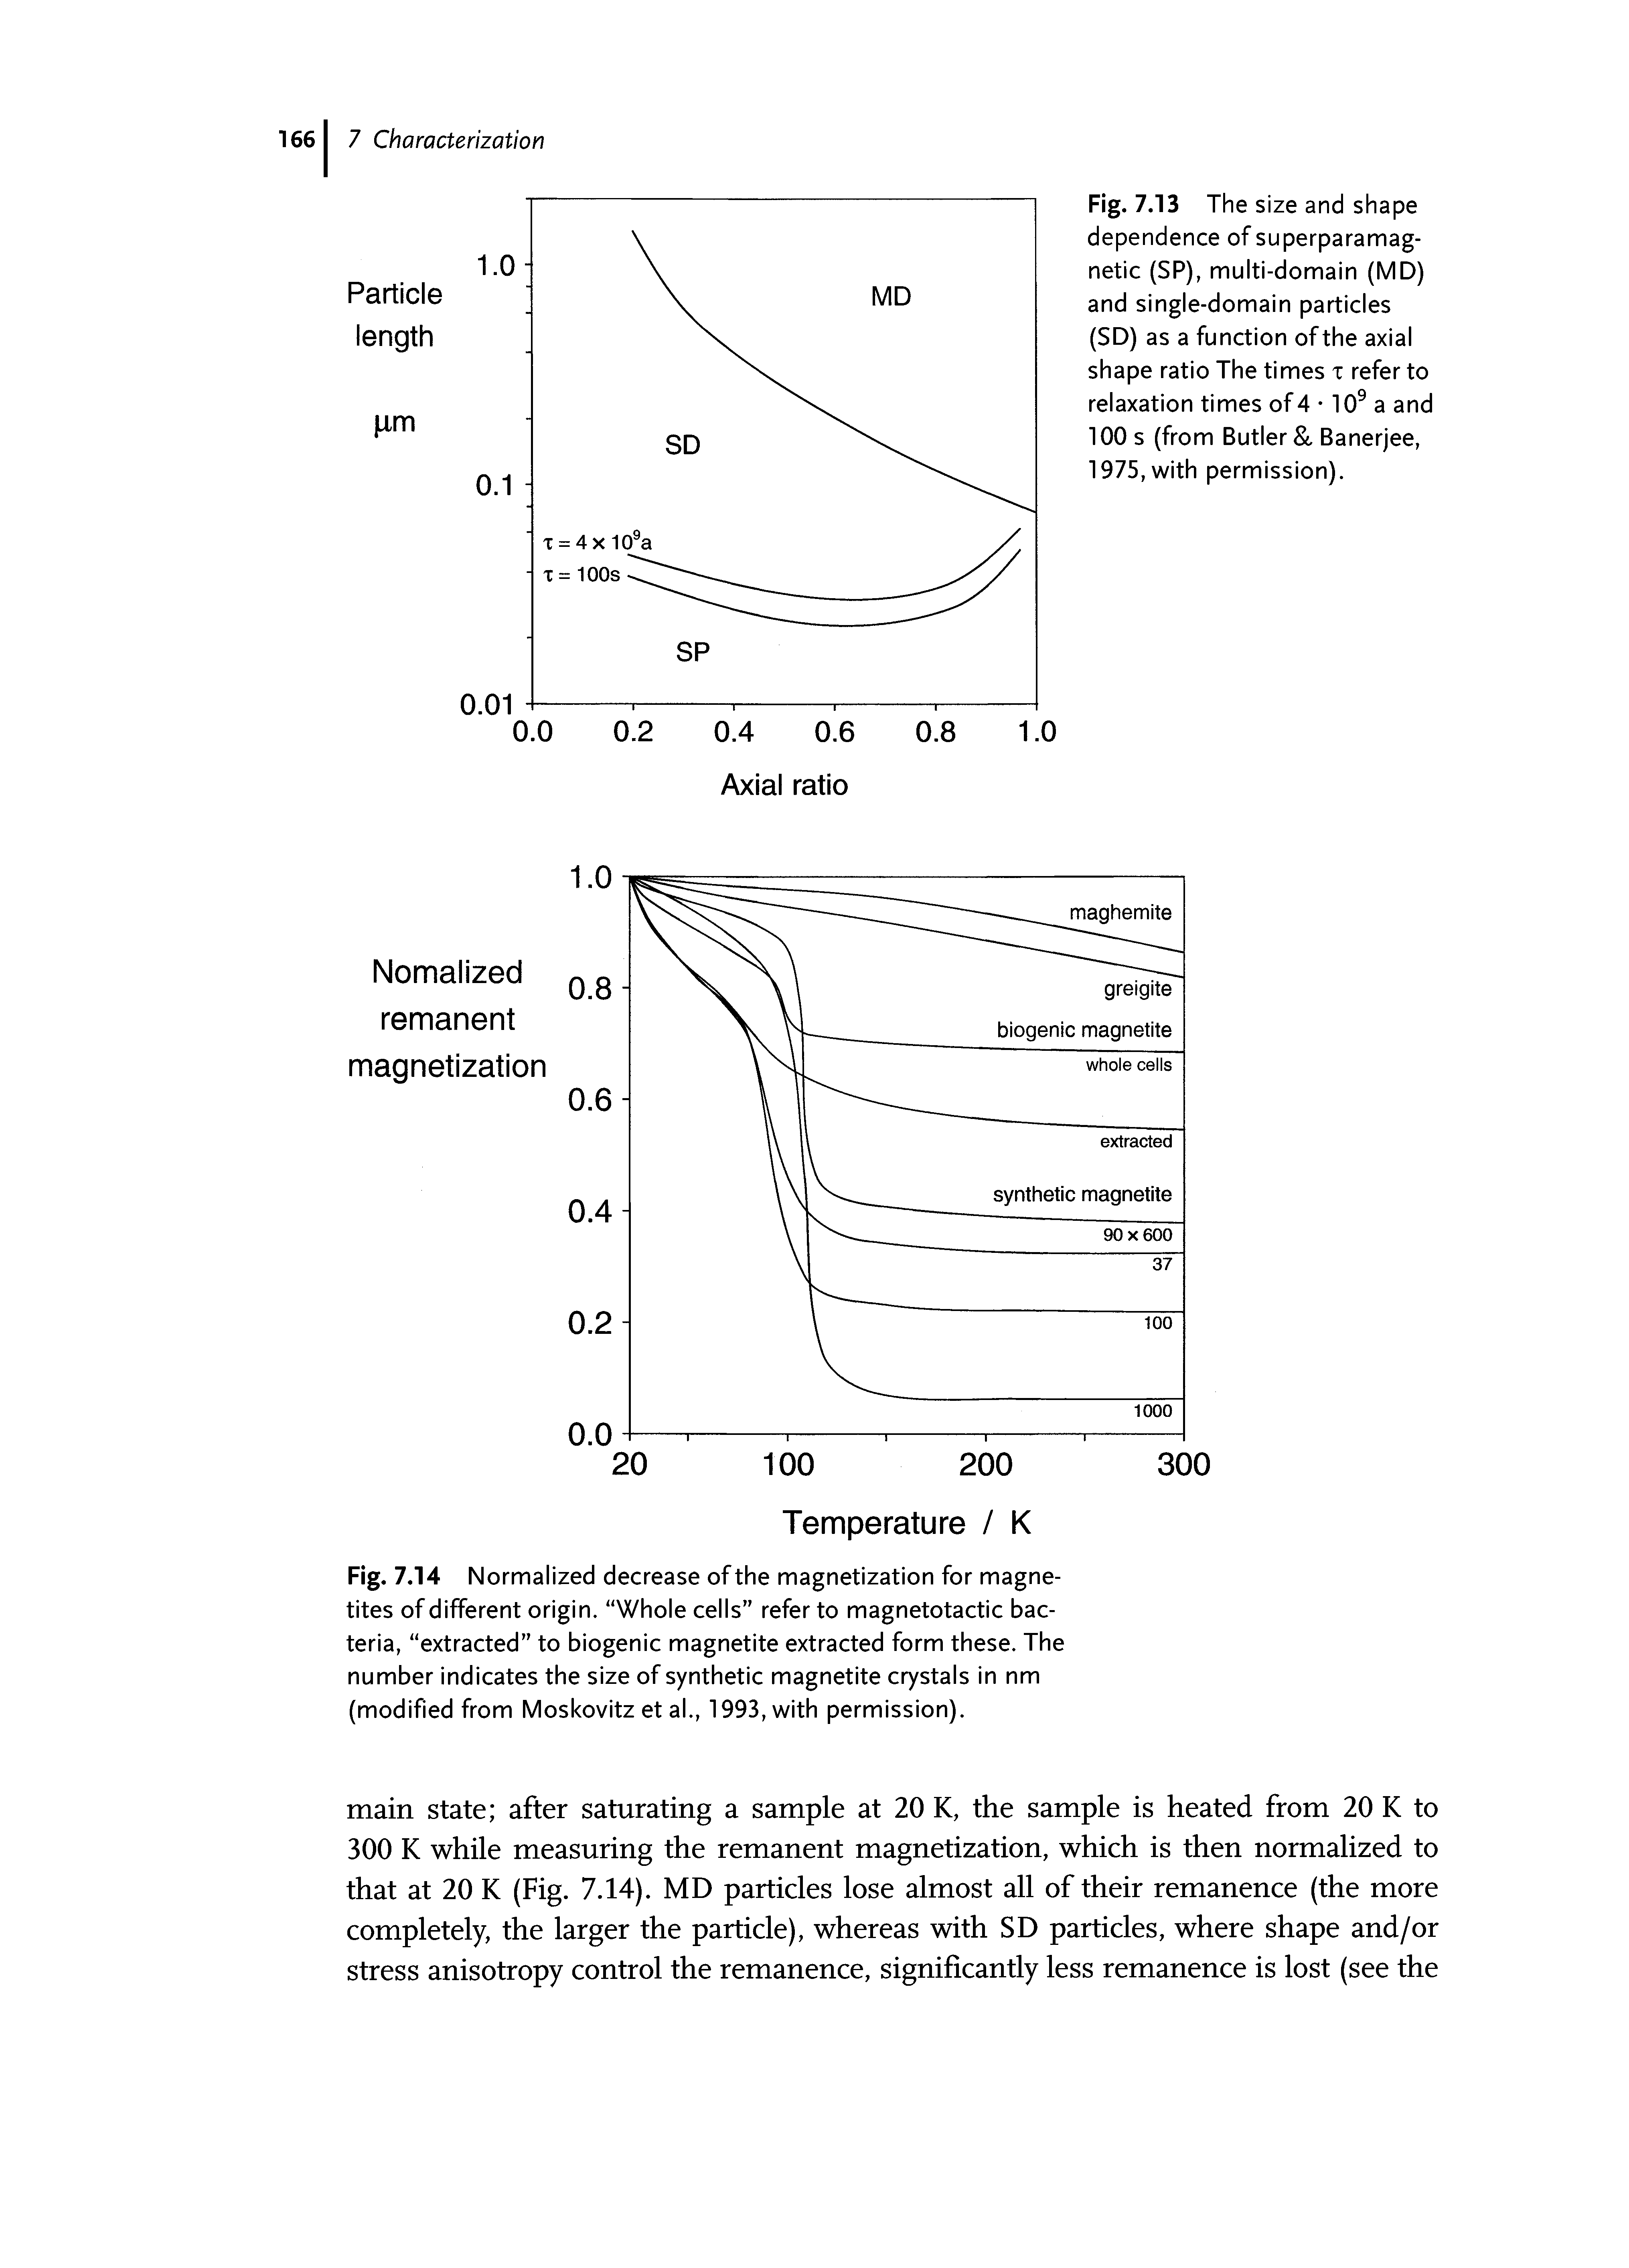 Fig. 7.14 Normalized decrease of the magnetization for magnetites of different origin. Whole cells refer to magnetotactic bacteria, extracted to biogenic magnetite extracted form these. The number indicates the size of synthetic magnetite crystals in nm (modified from Moskovitz etal., 1993, with permission).